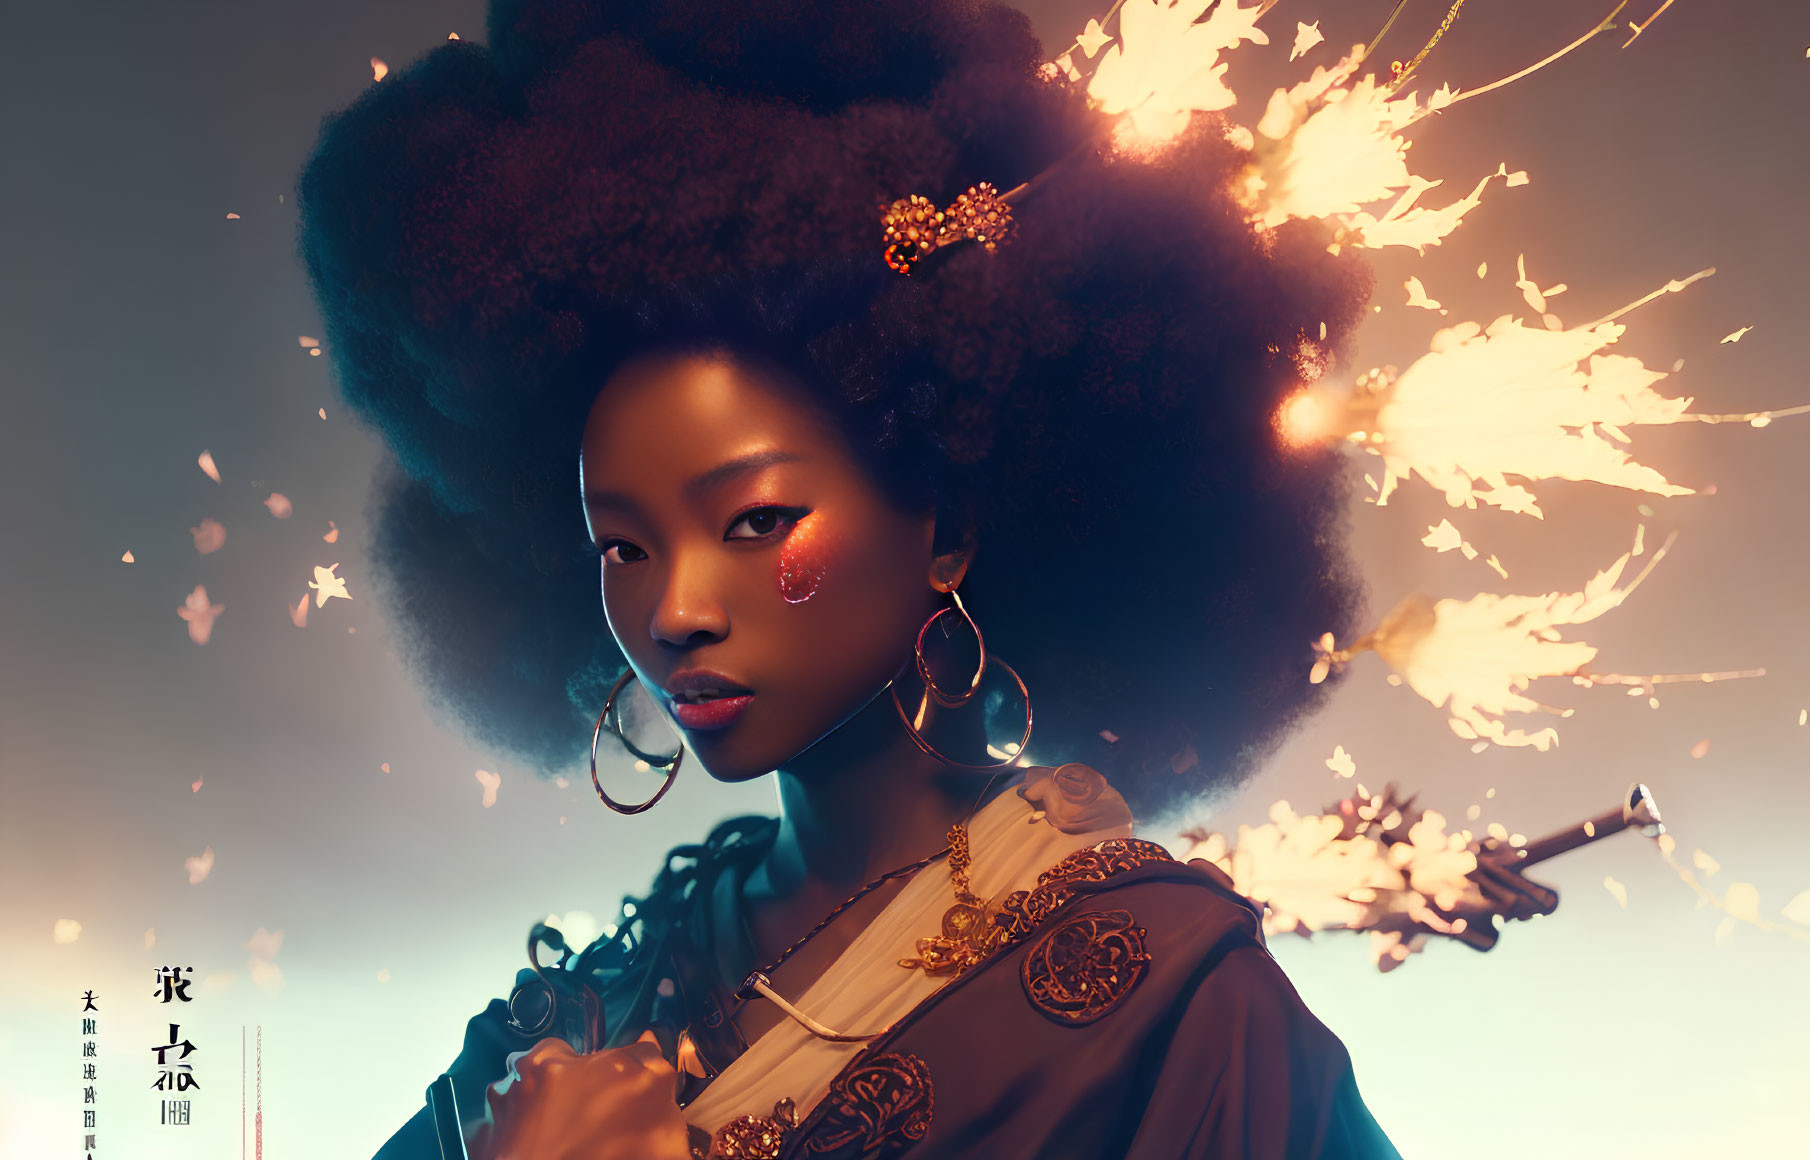 Intense gaze of woman with afro and fiery effects against warm backdrop